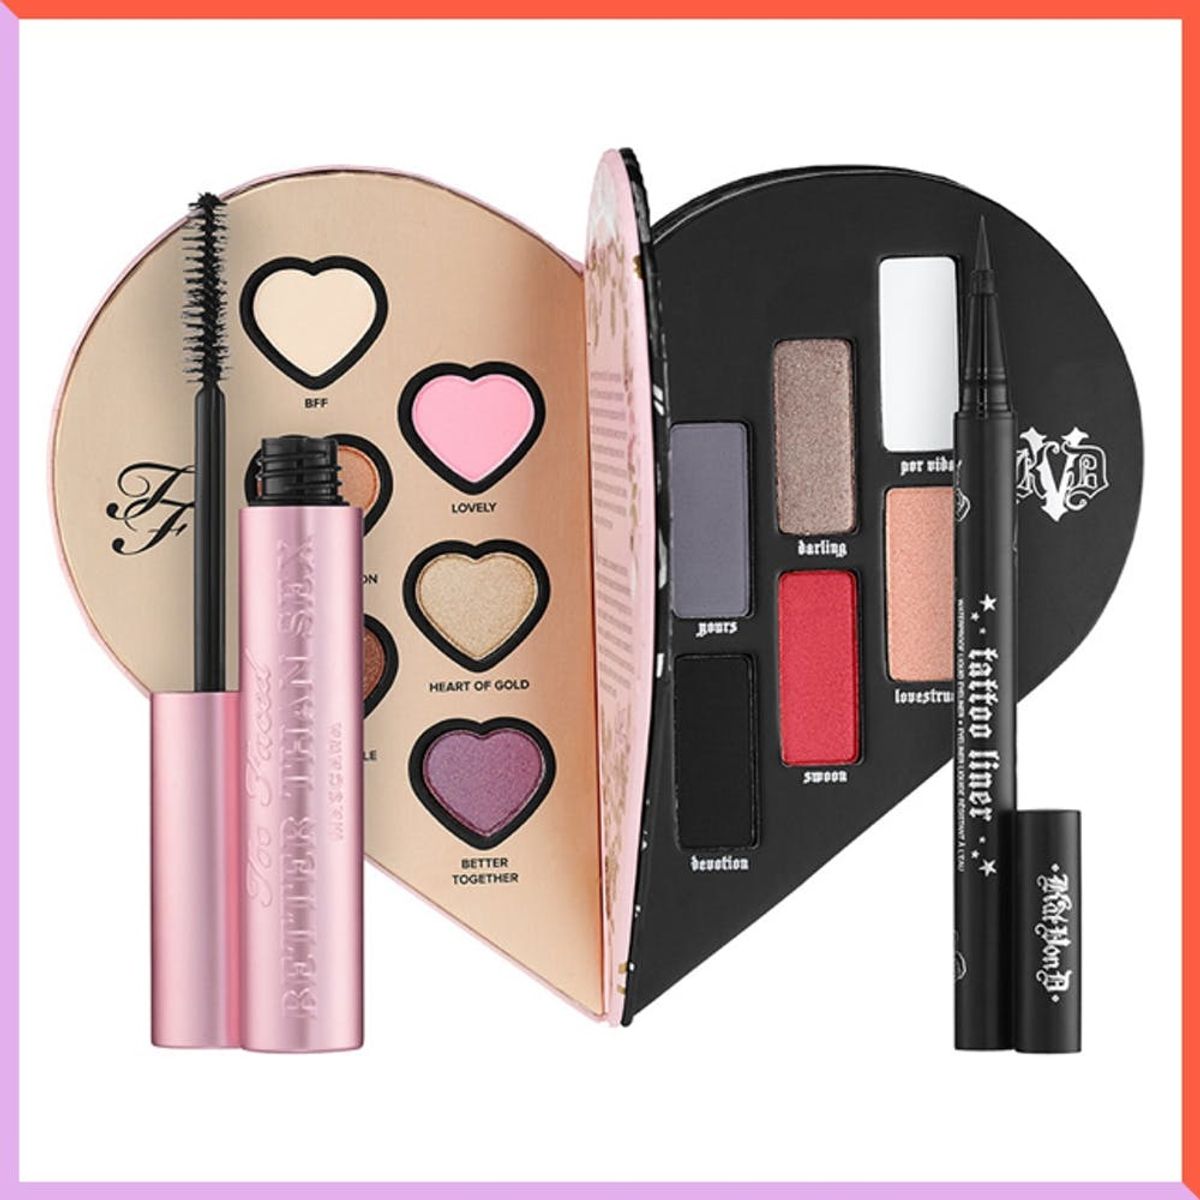 8 Lust-Worthy Beauty Gifts We’re Craving for Valentine’s Day